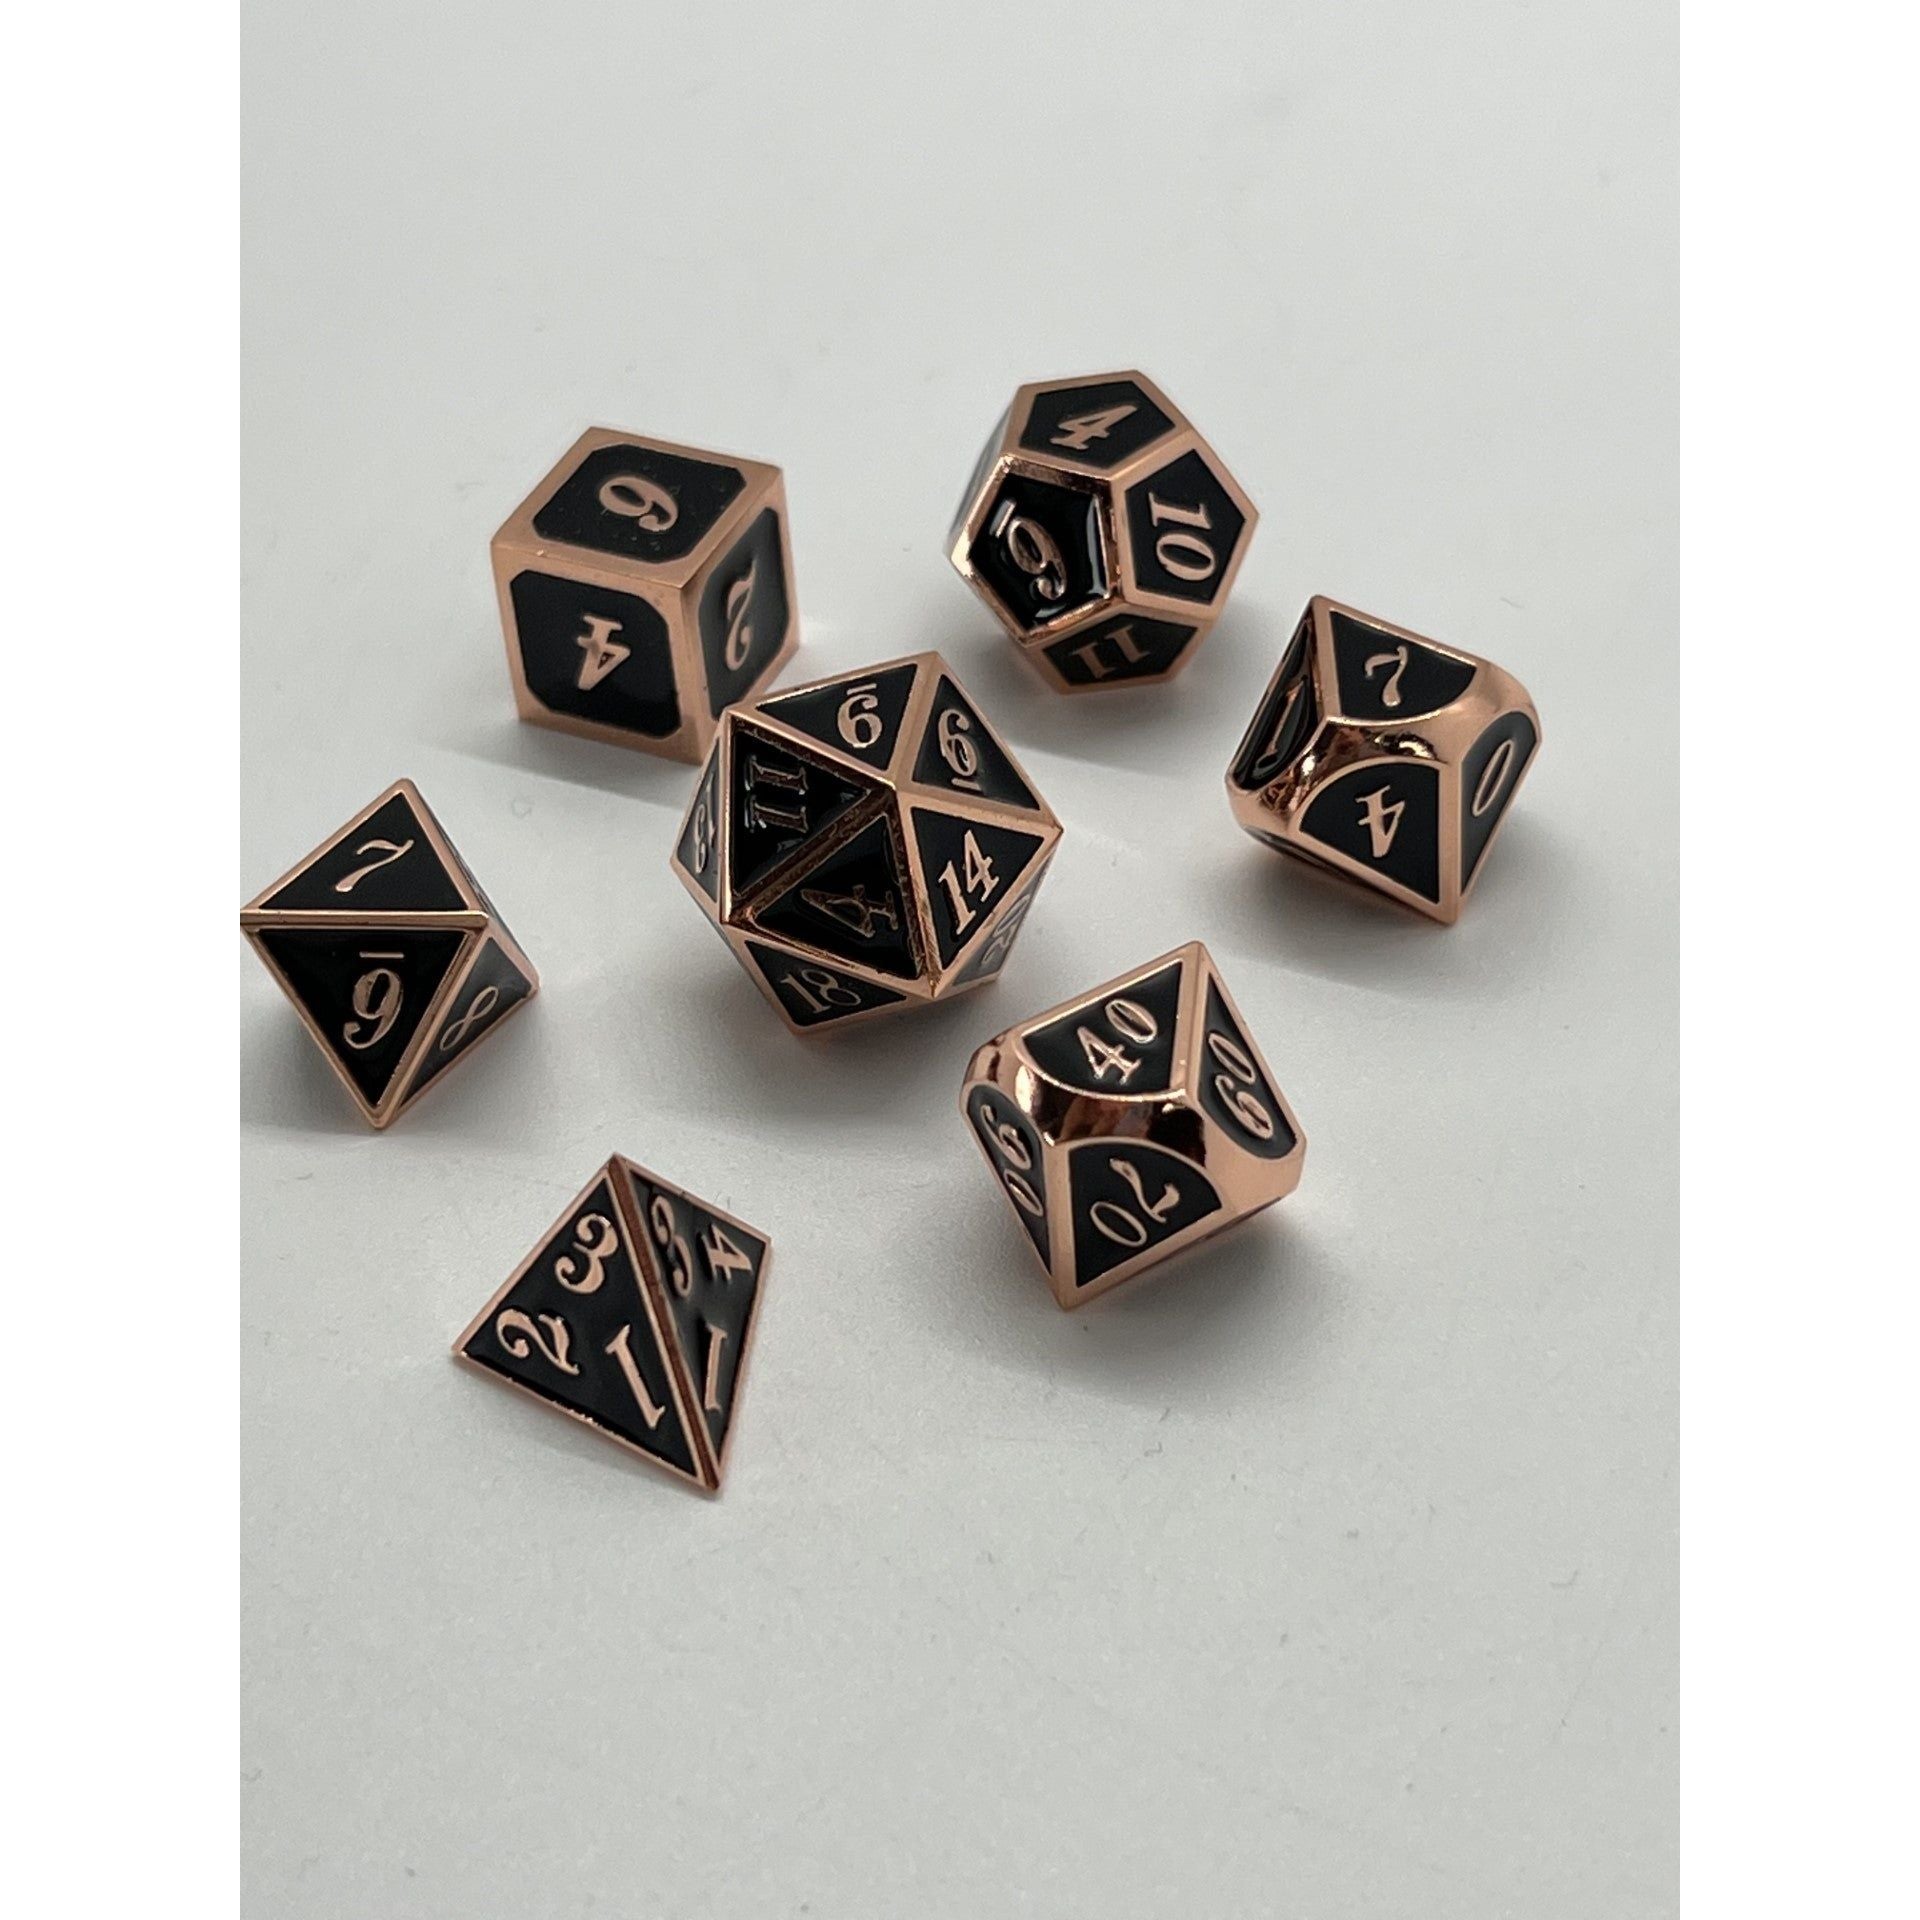 Galactic Dice Premium Dice Sets - NF Dice (Ver 4) Set of 7 Dice with Tin | Galactic Toys & Collectibles